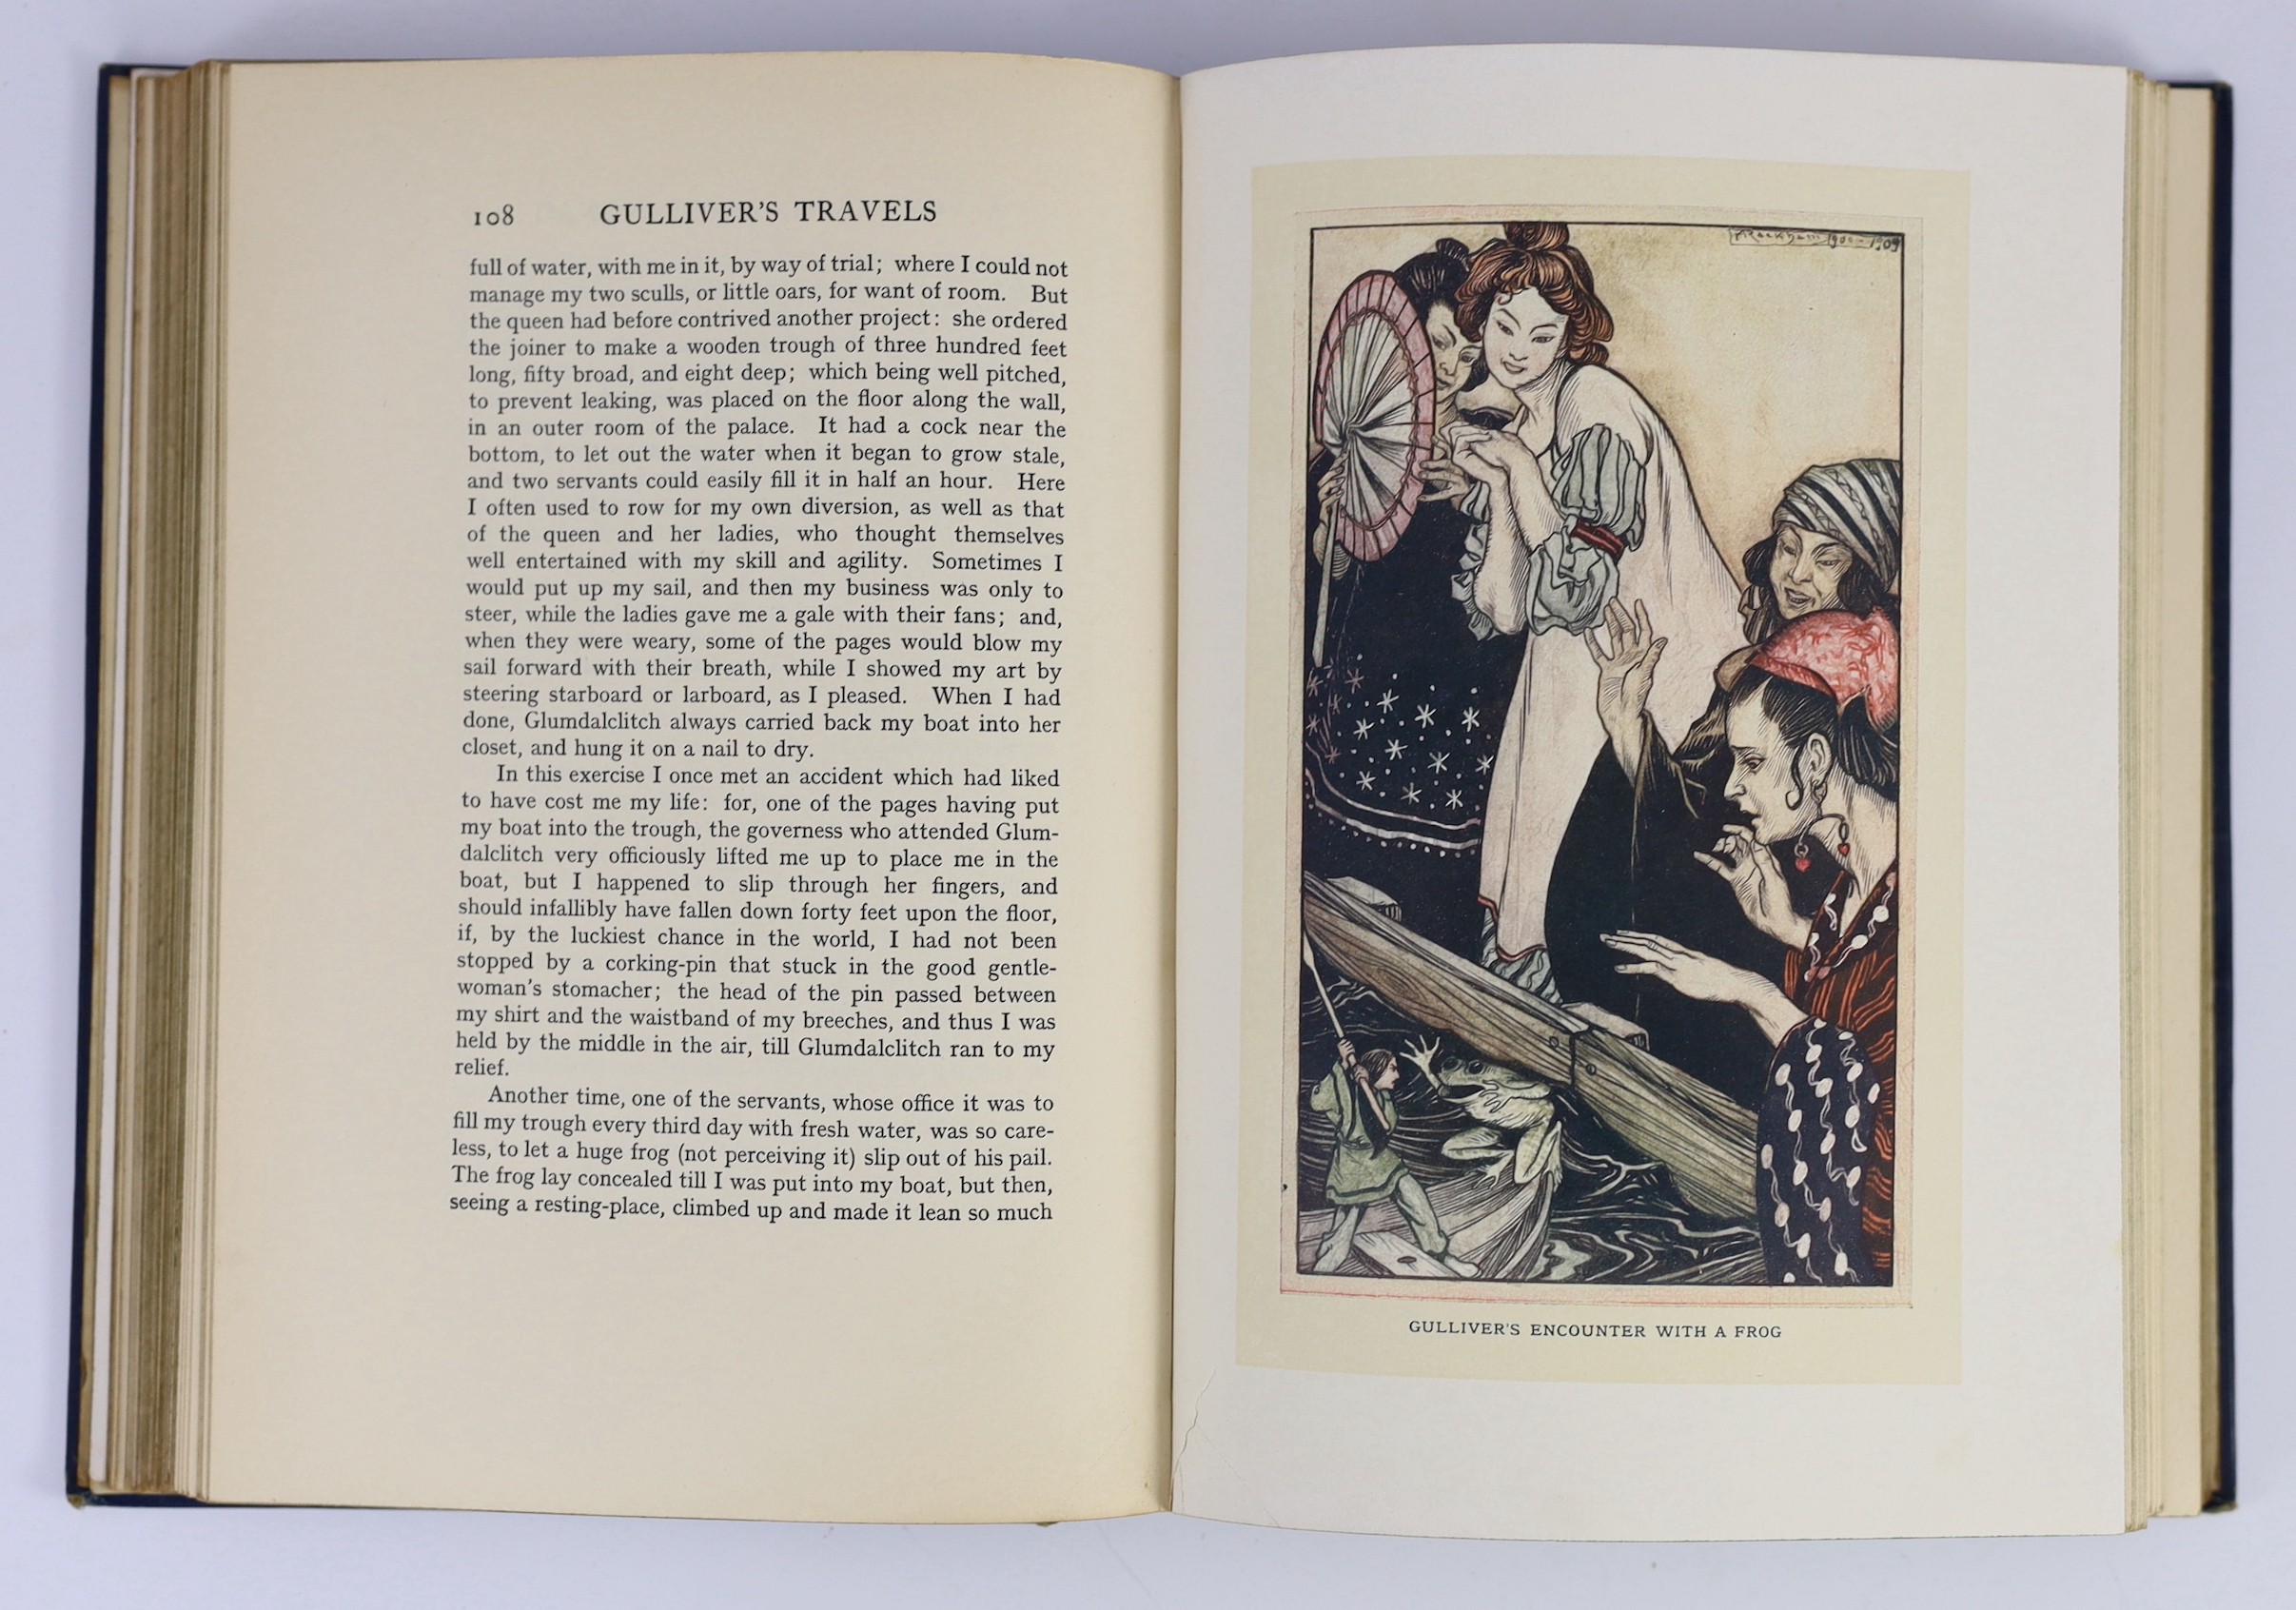 Swift, Jonathan - Gulliver’s Travels, illustrated with 12 coloured plates by Arthur Rackham, 8vo, blue pictorial cloth gilt, J.M. Dent & Co., London, 1909